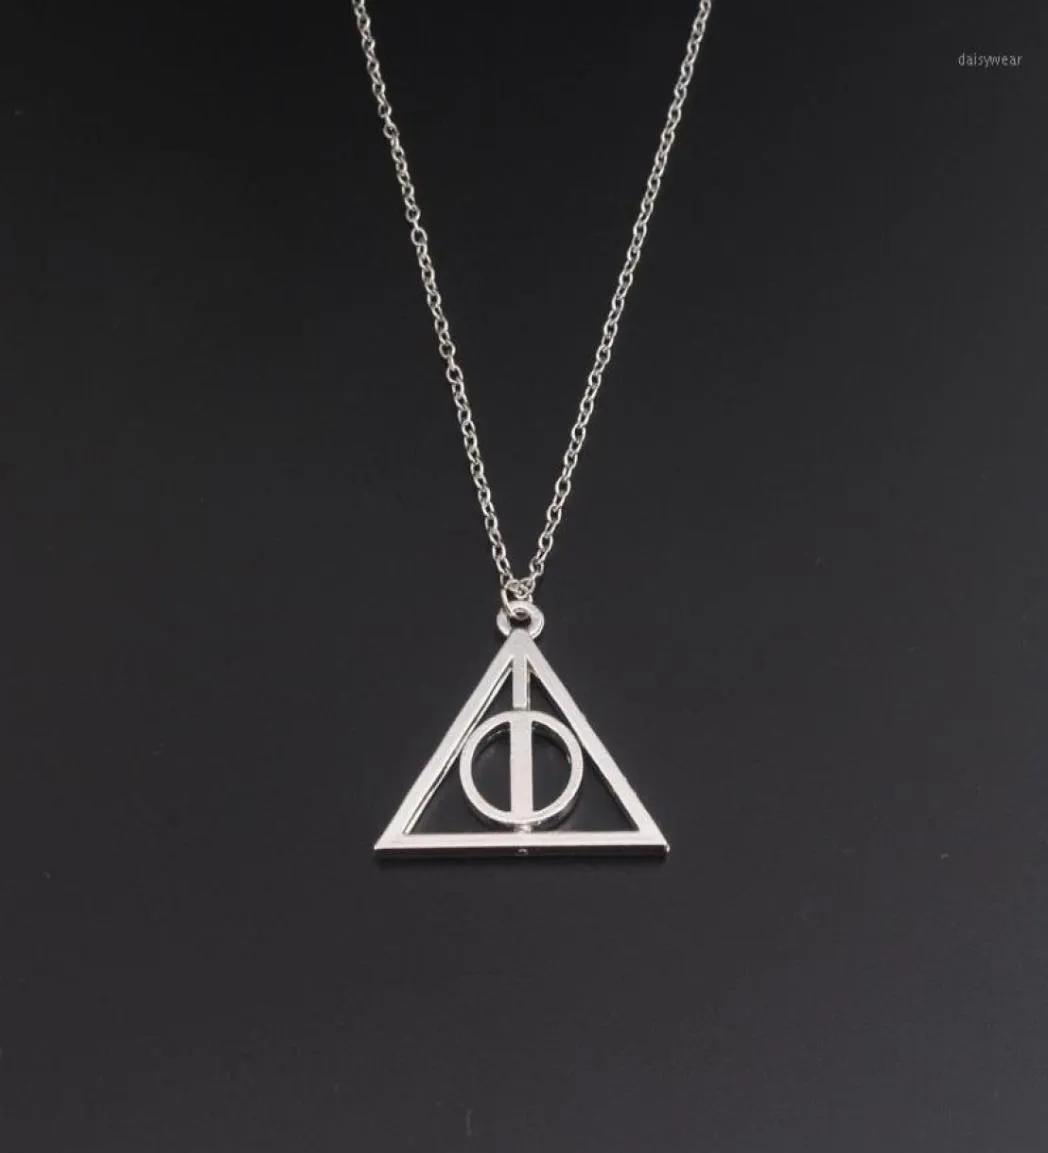 SG Movie HP Deathly Hallows Wizard Necklace Can Be Rotated Gregory039s Fiduciary Triangle Men Lady Necklaces Pendants11576604